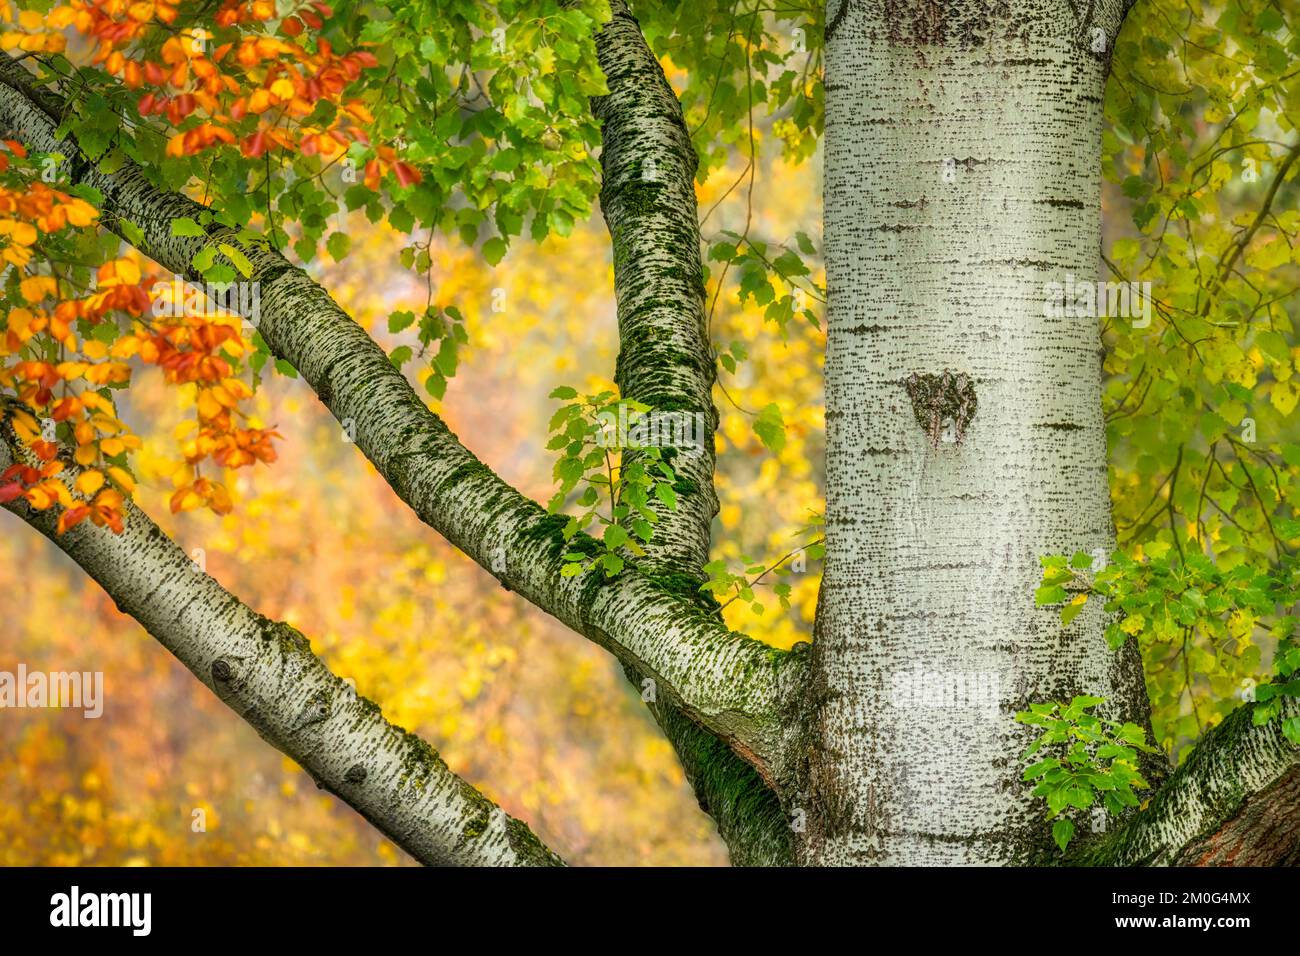 Thick limbs extend from the tree trunk, Populus species, the bark with diamond-shaped lenticels, autumnal coloured environment, Rhineland, Germany Stock Photo